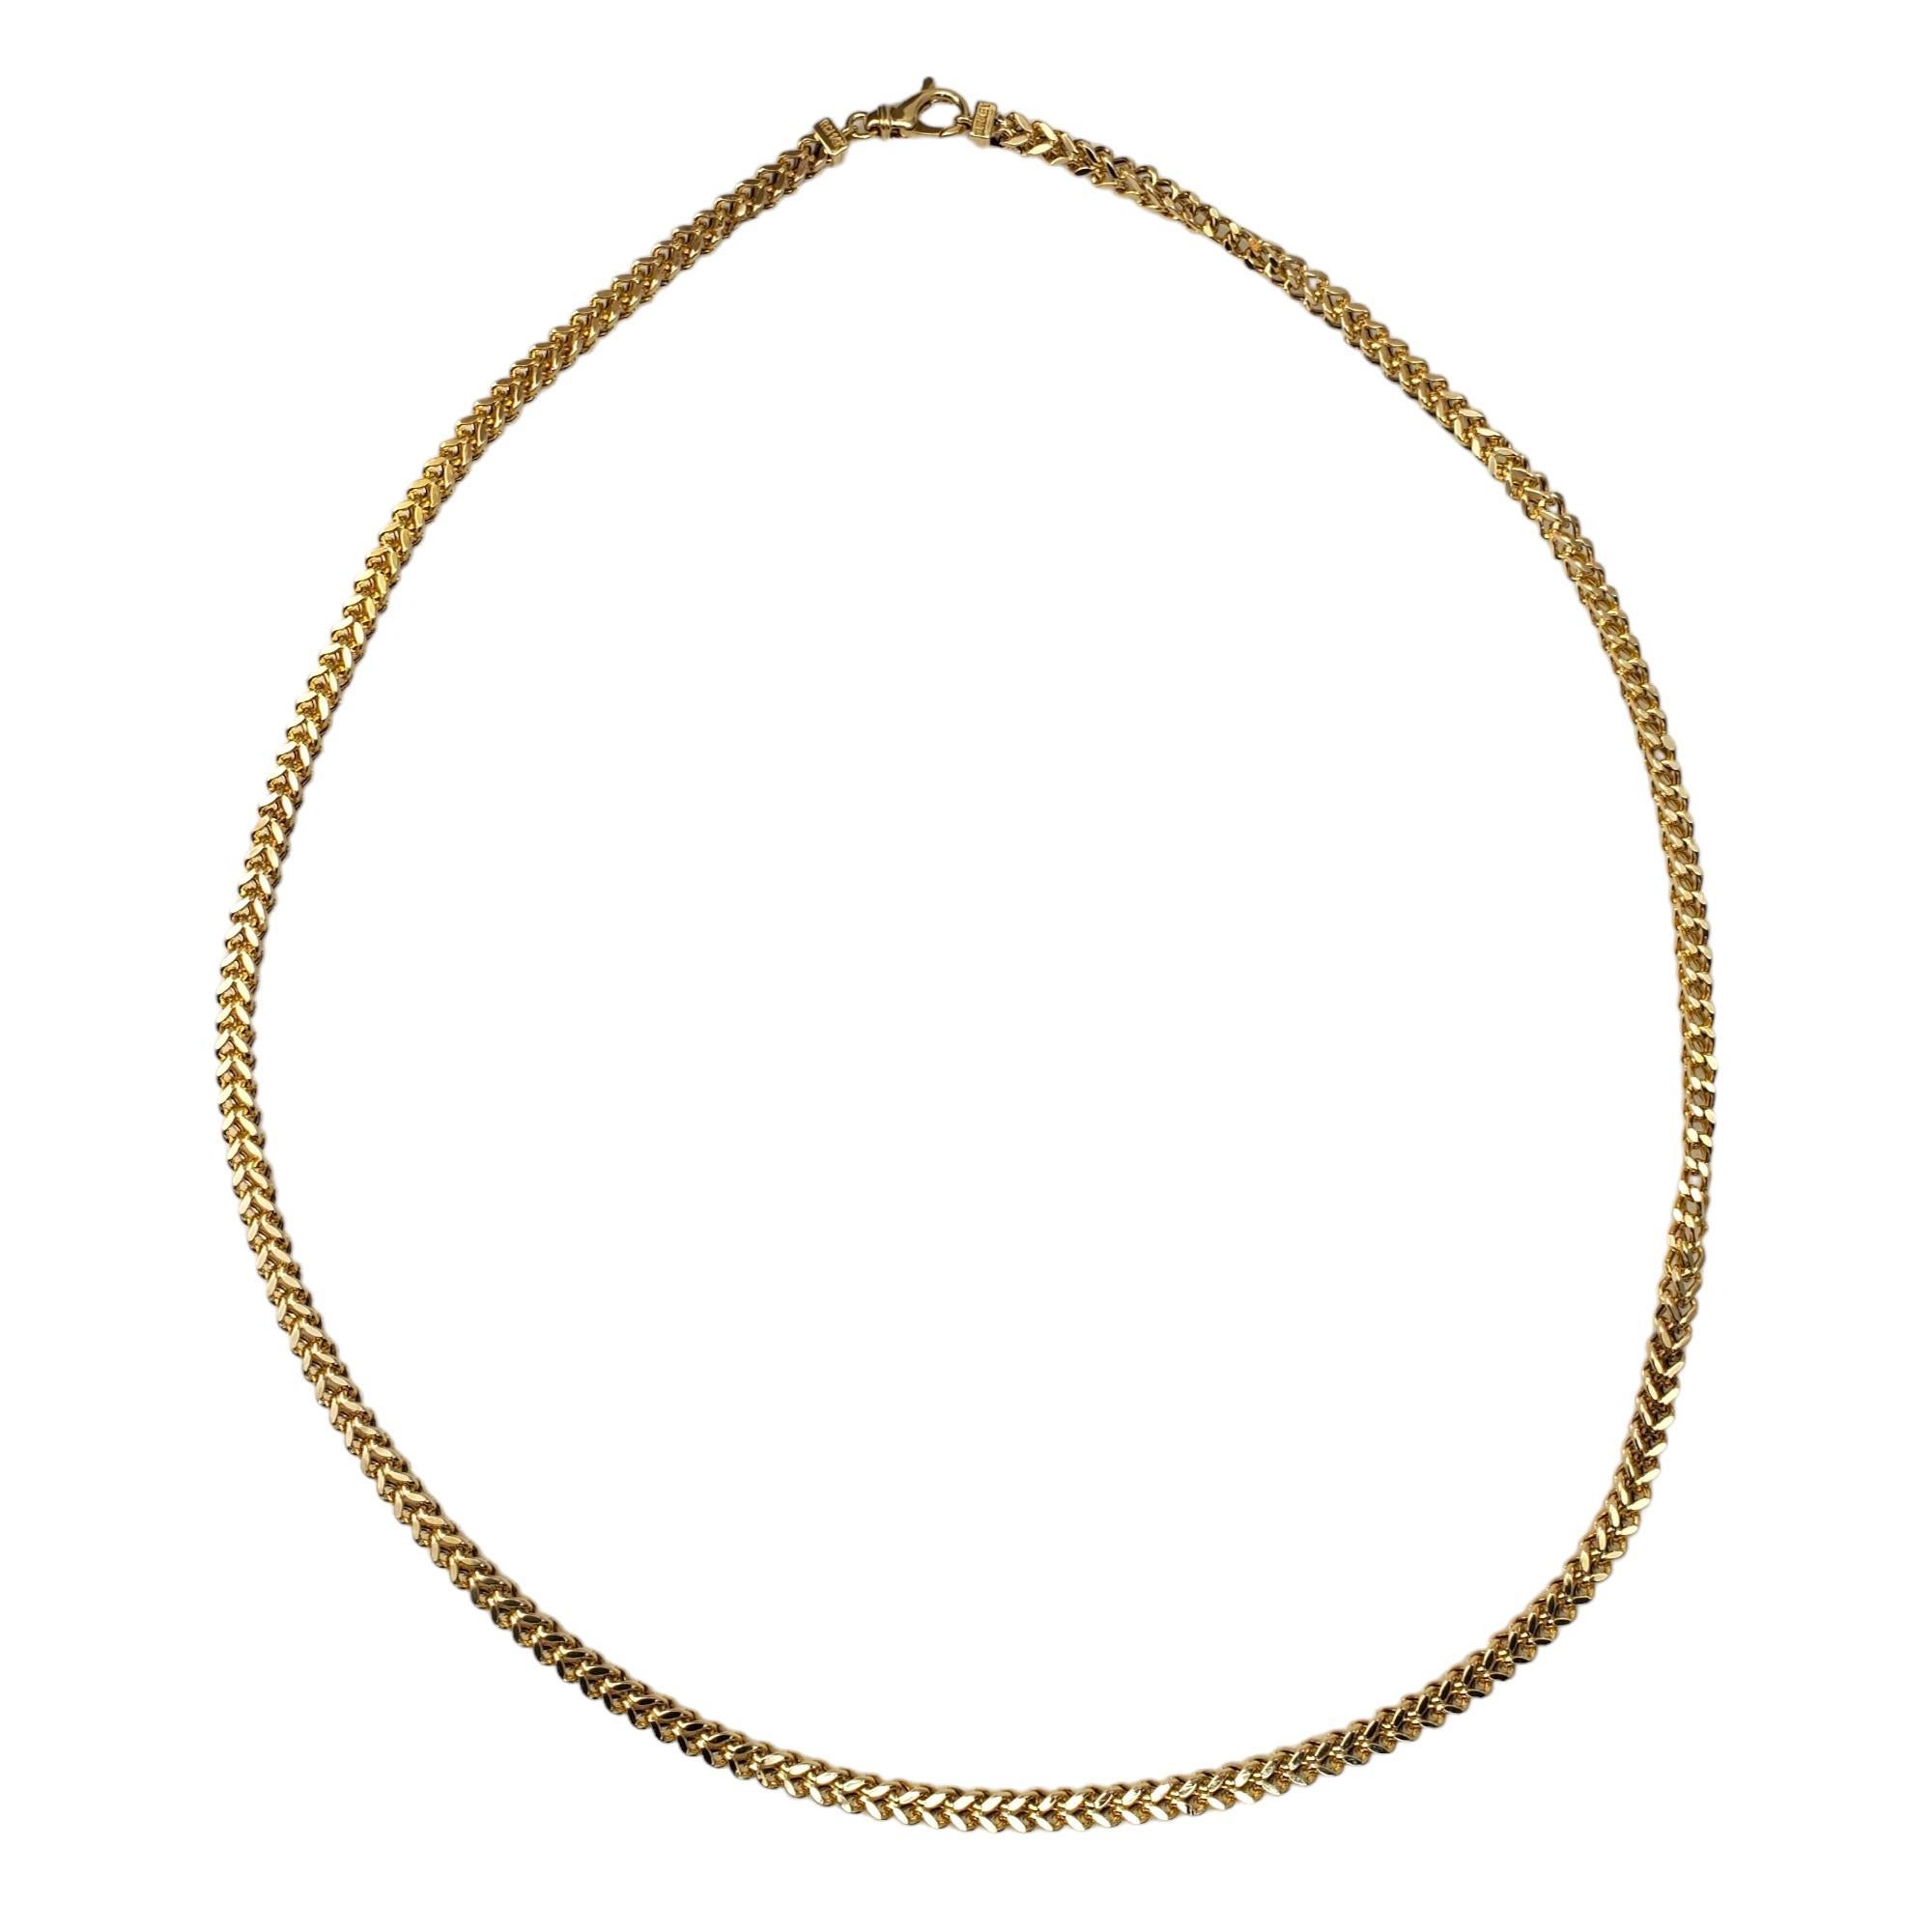 Vintage 14K Yellow Gold Franco Chain Necklace - 

This elegant necklace is a staple piece in any collection. 
 
Chain Length: 24 Inches

4.4mm x 3.5mm links

Weight: 11.1dwt. / 17.4 gr.

Marked: 14K RCI Turkey

Very good condition, professionally